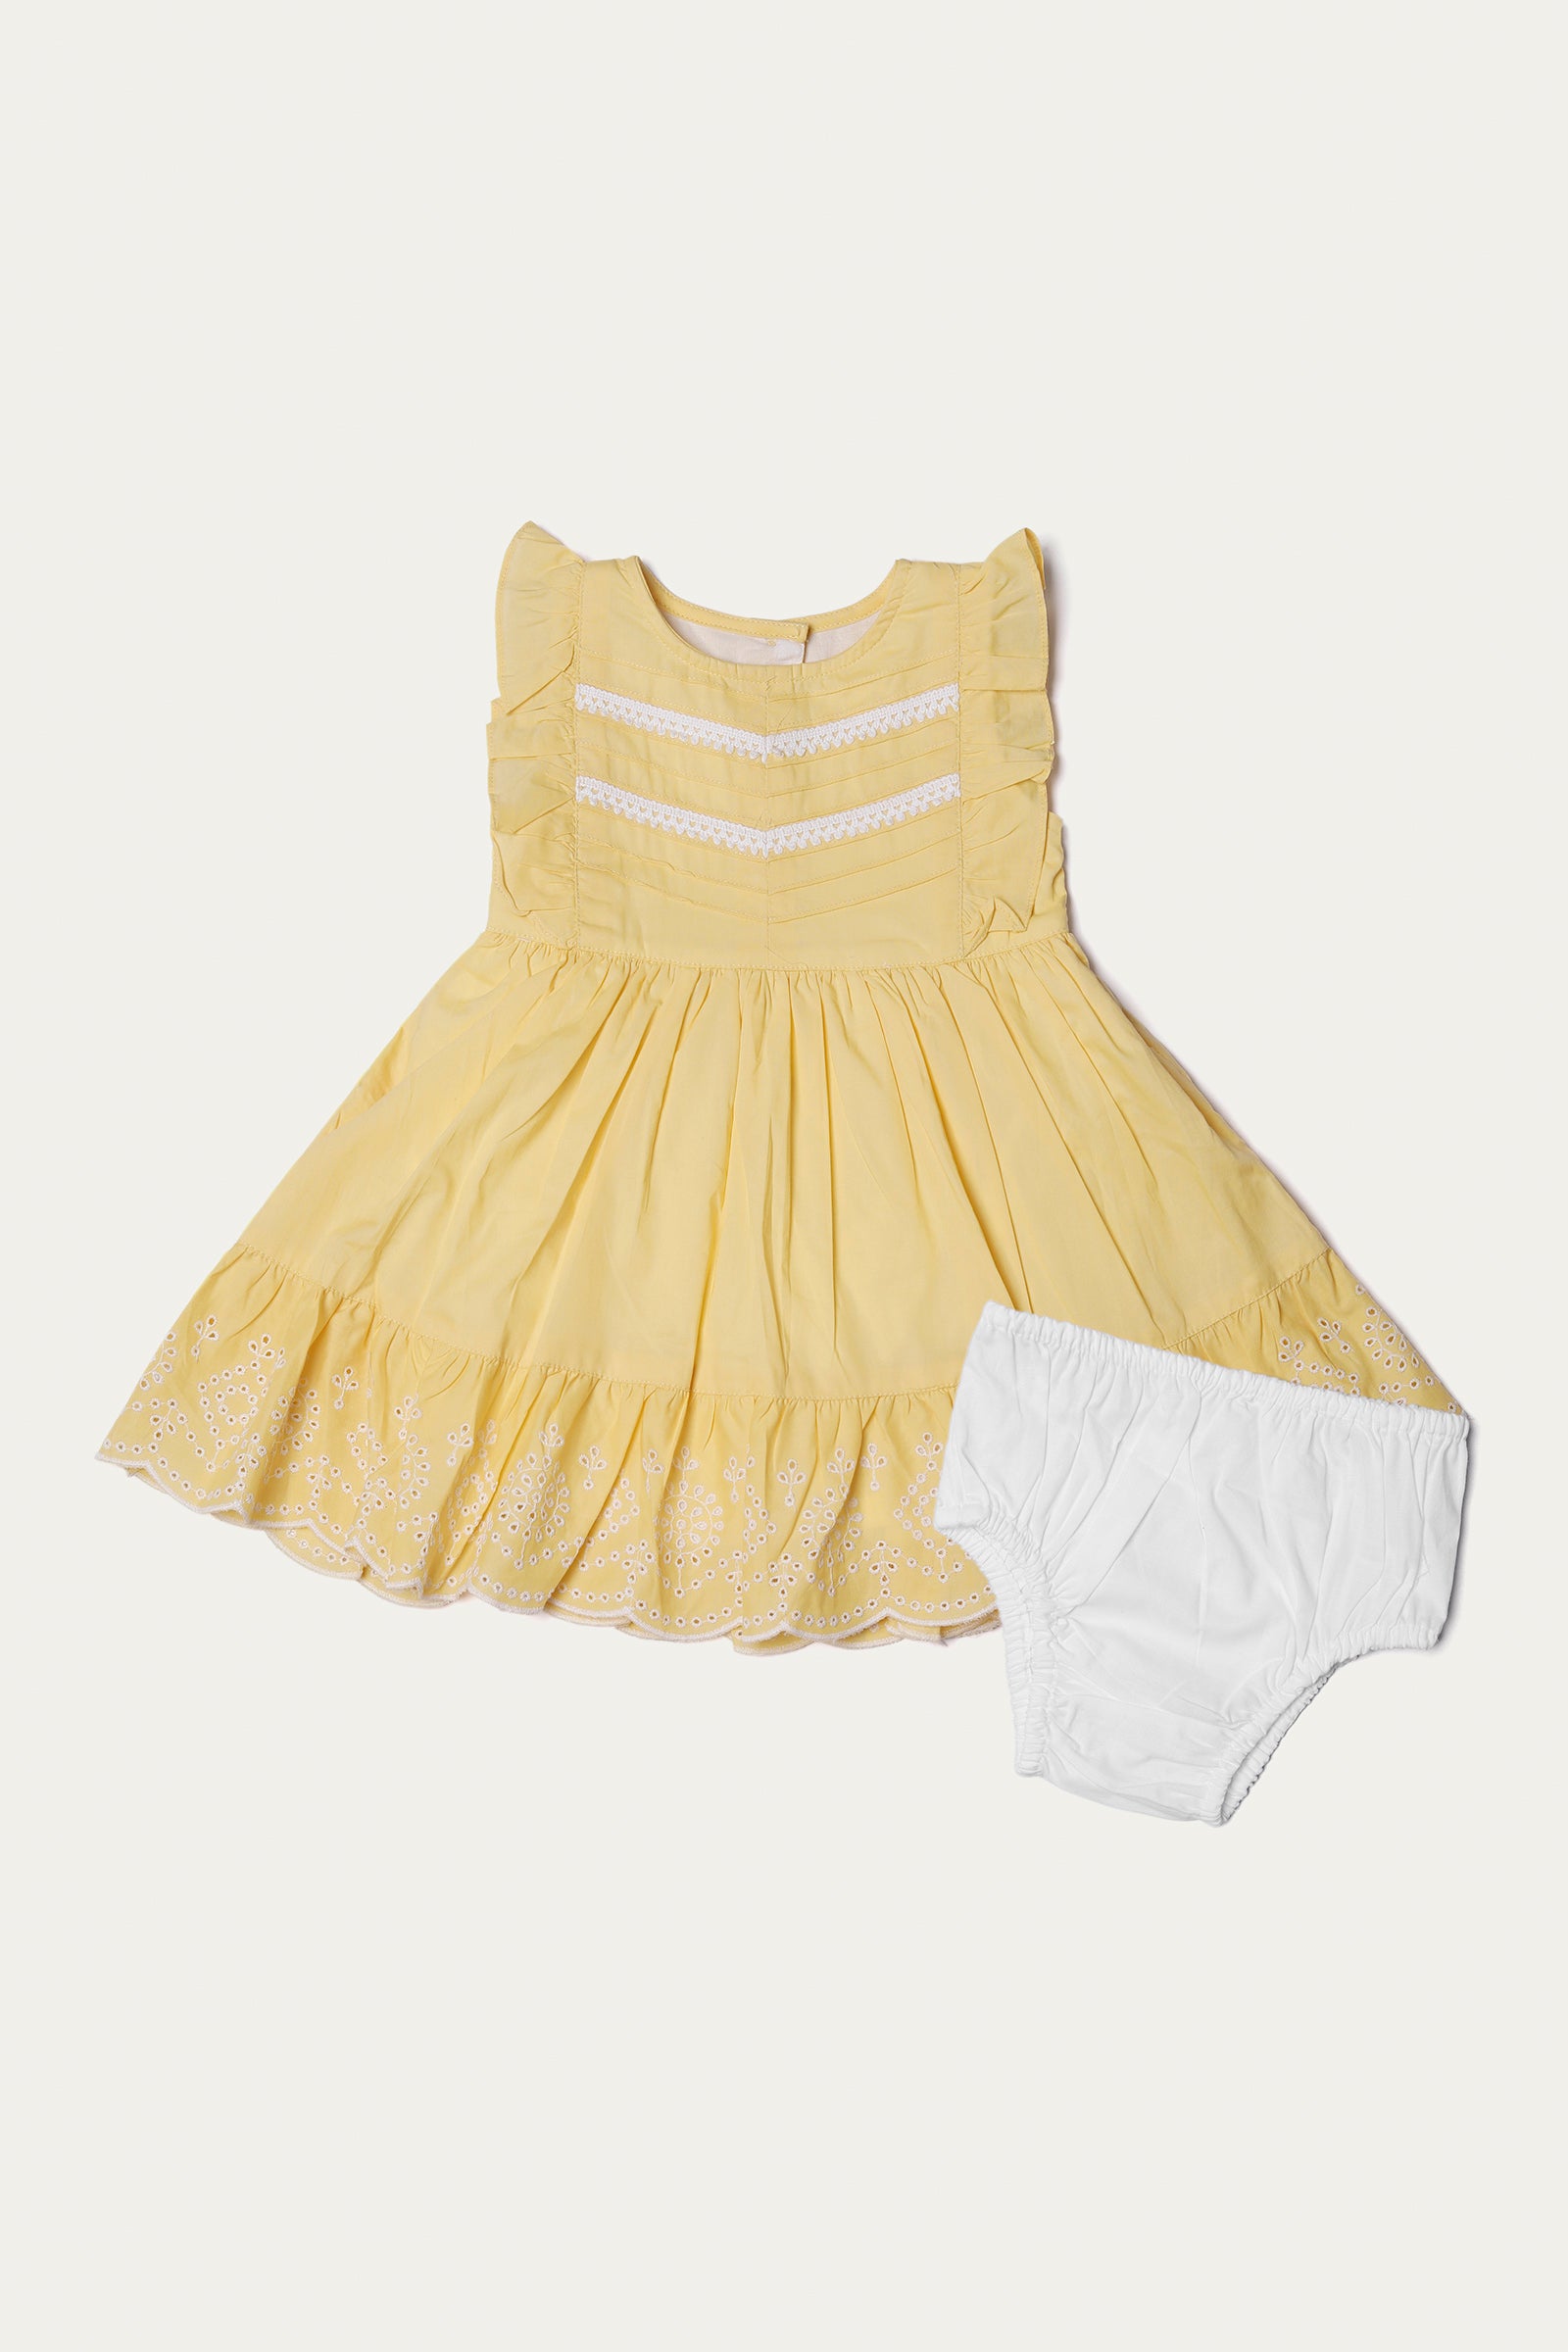 Embroidered Frock with Diaper Cover (IF-386)